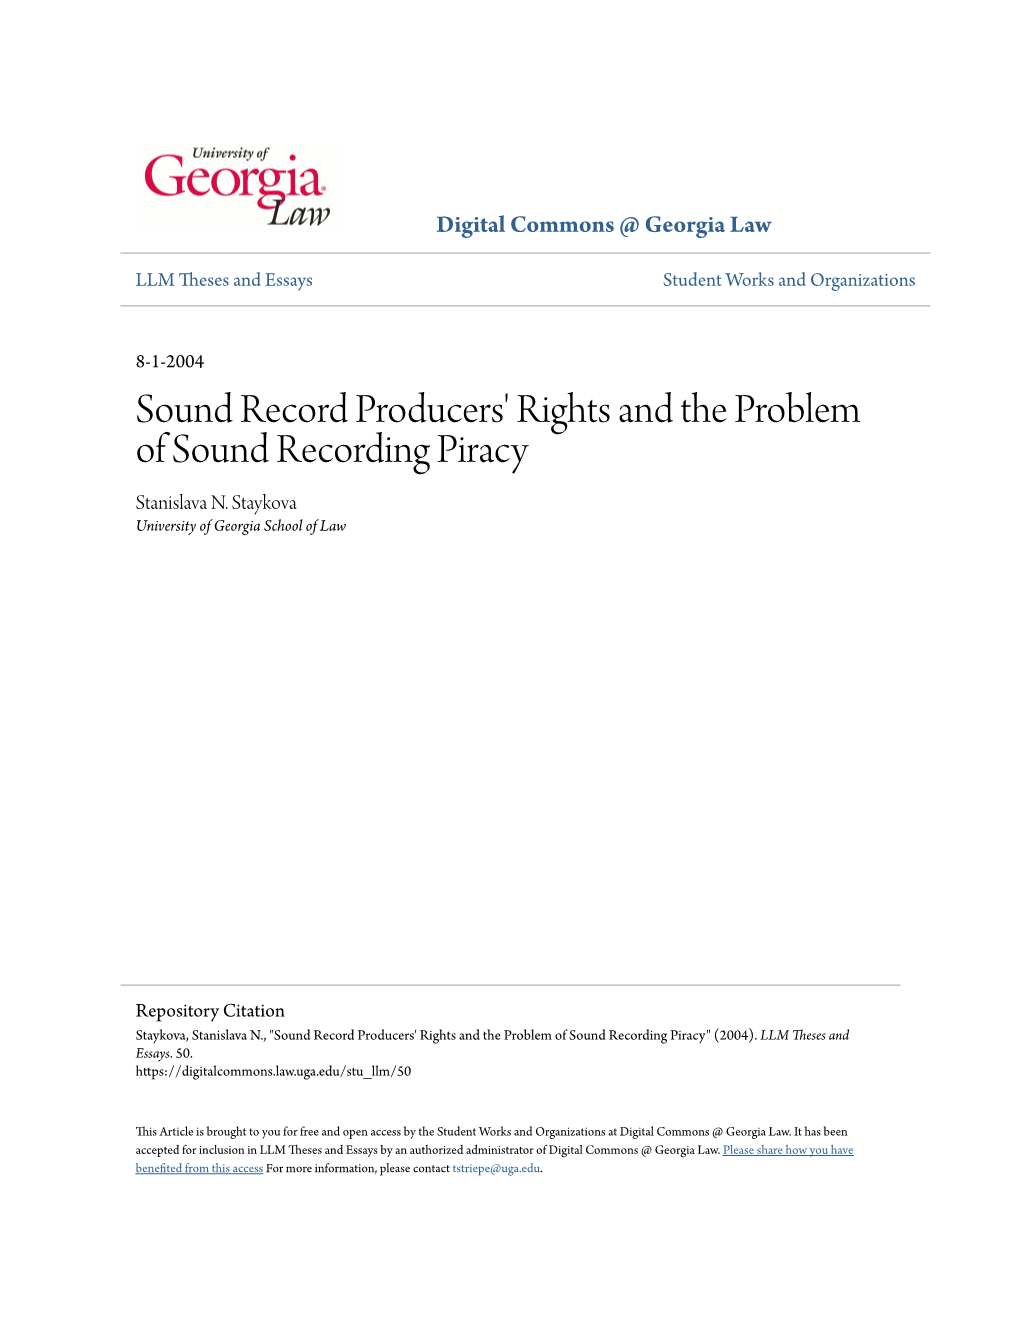 Sound Record Producers' Rights and the Problem of Sound Recording Piracy Stanislava N